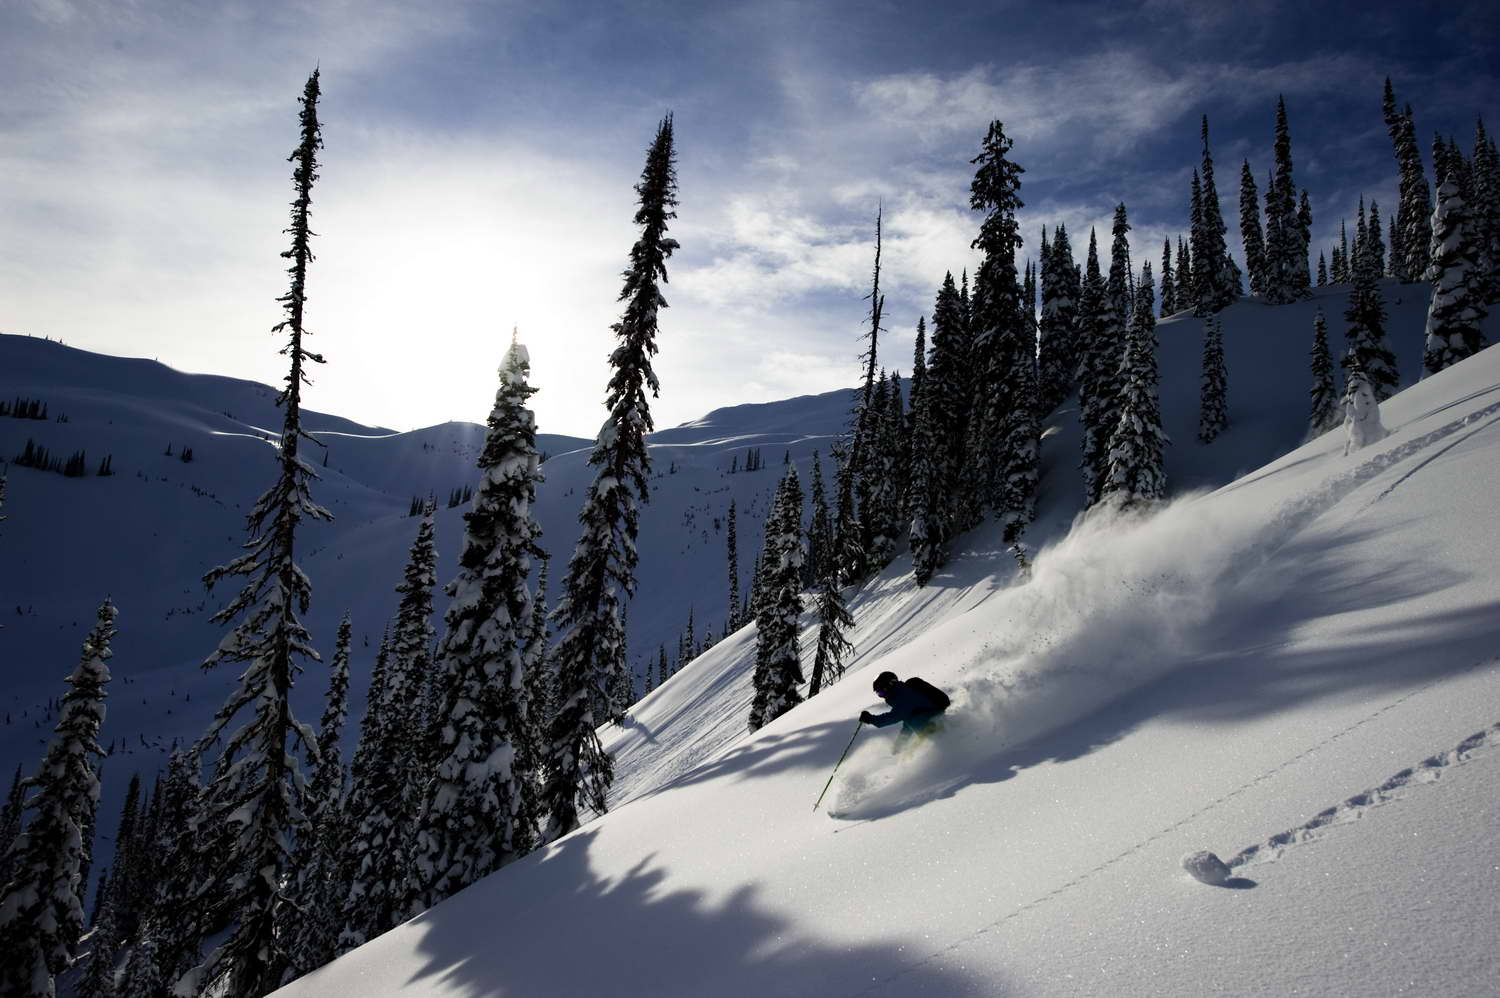 Heli Skiing Revelstoke British Columbia intended for The Awesome  how to ski revelstoke with regard to Your property